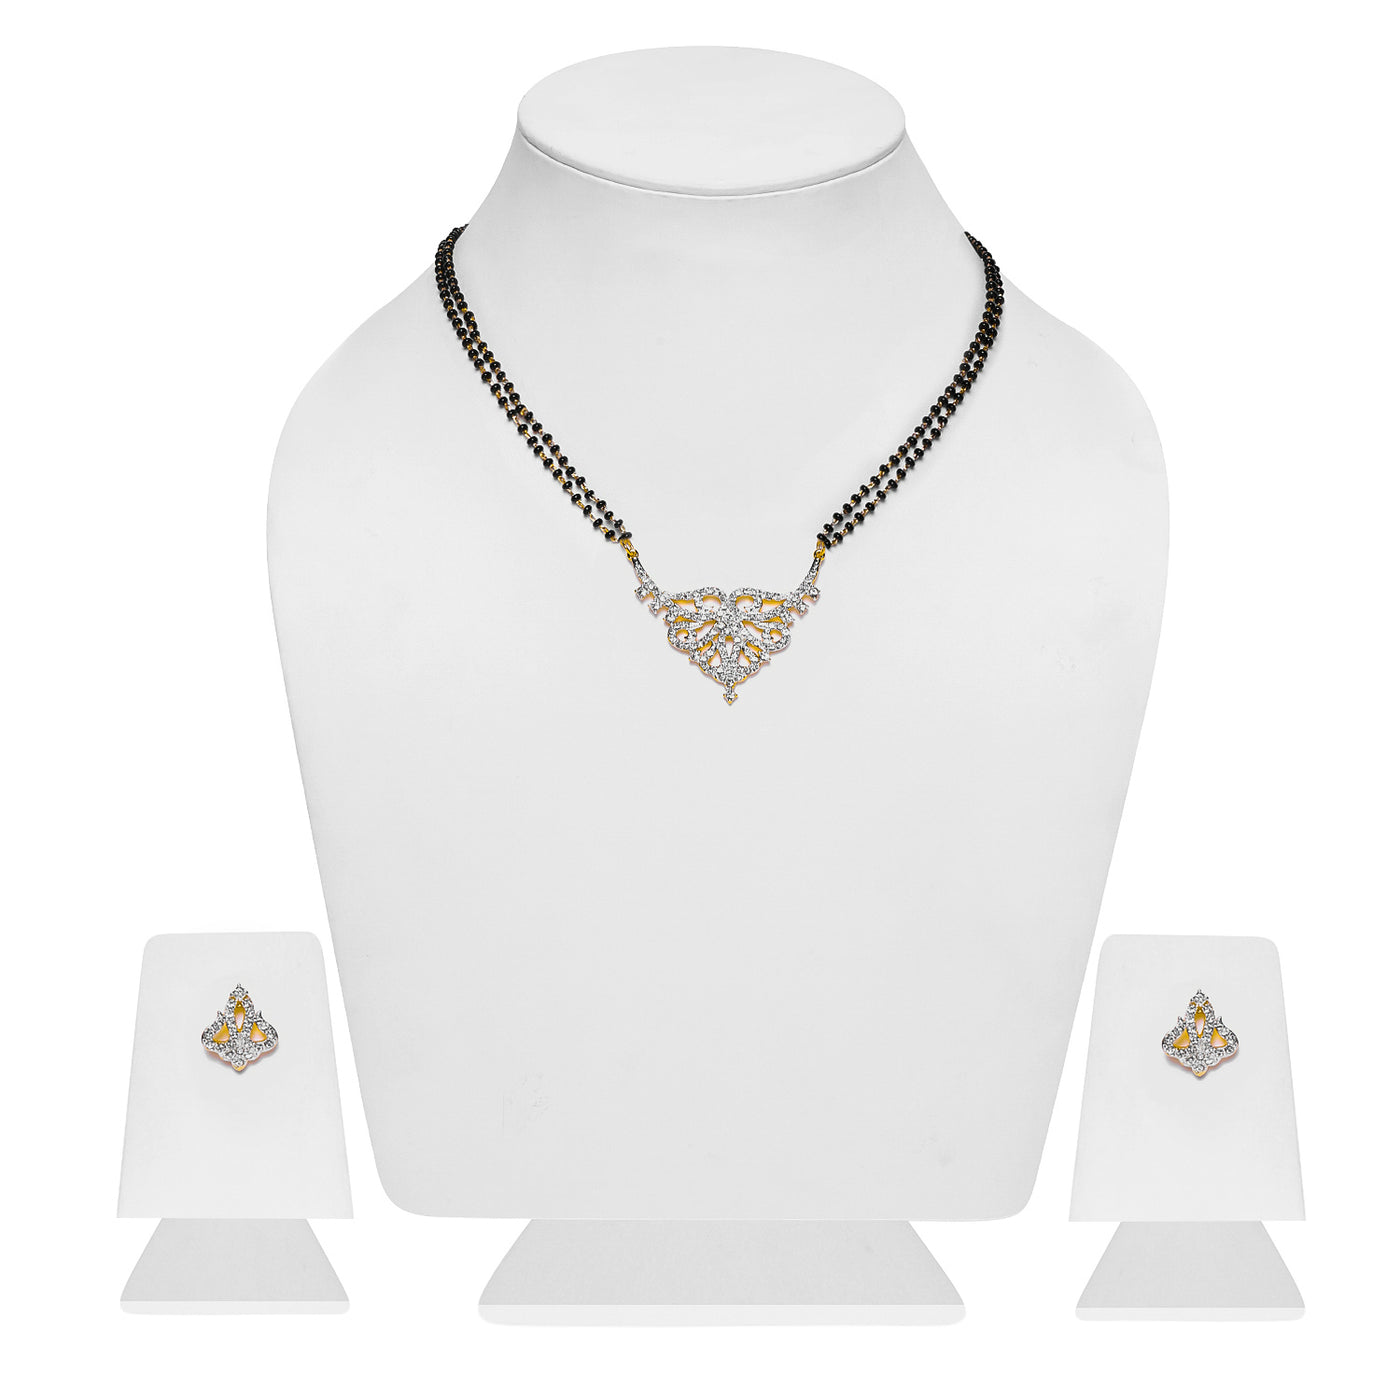 Estele Gold Plated Nestled Mangalsutra Necklace Set with Austrian Crystals for Women